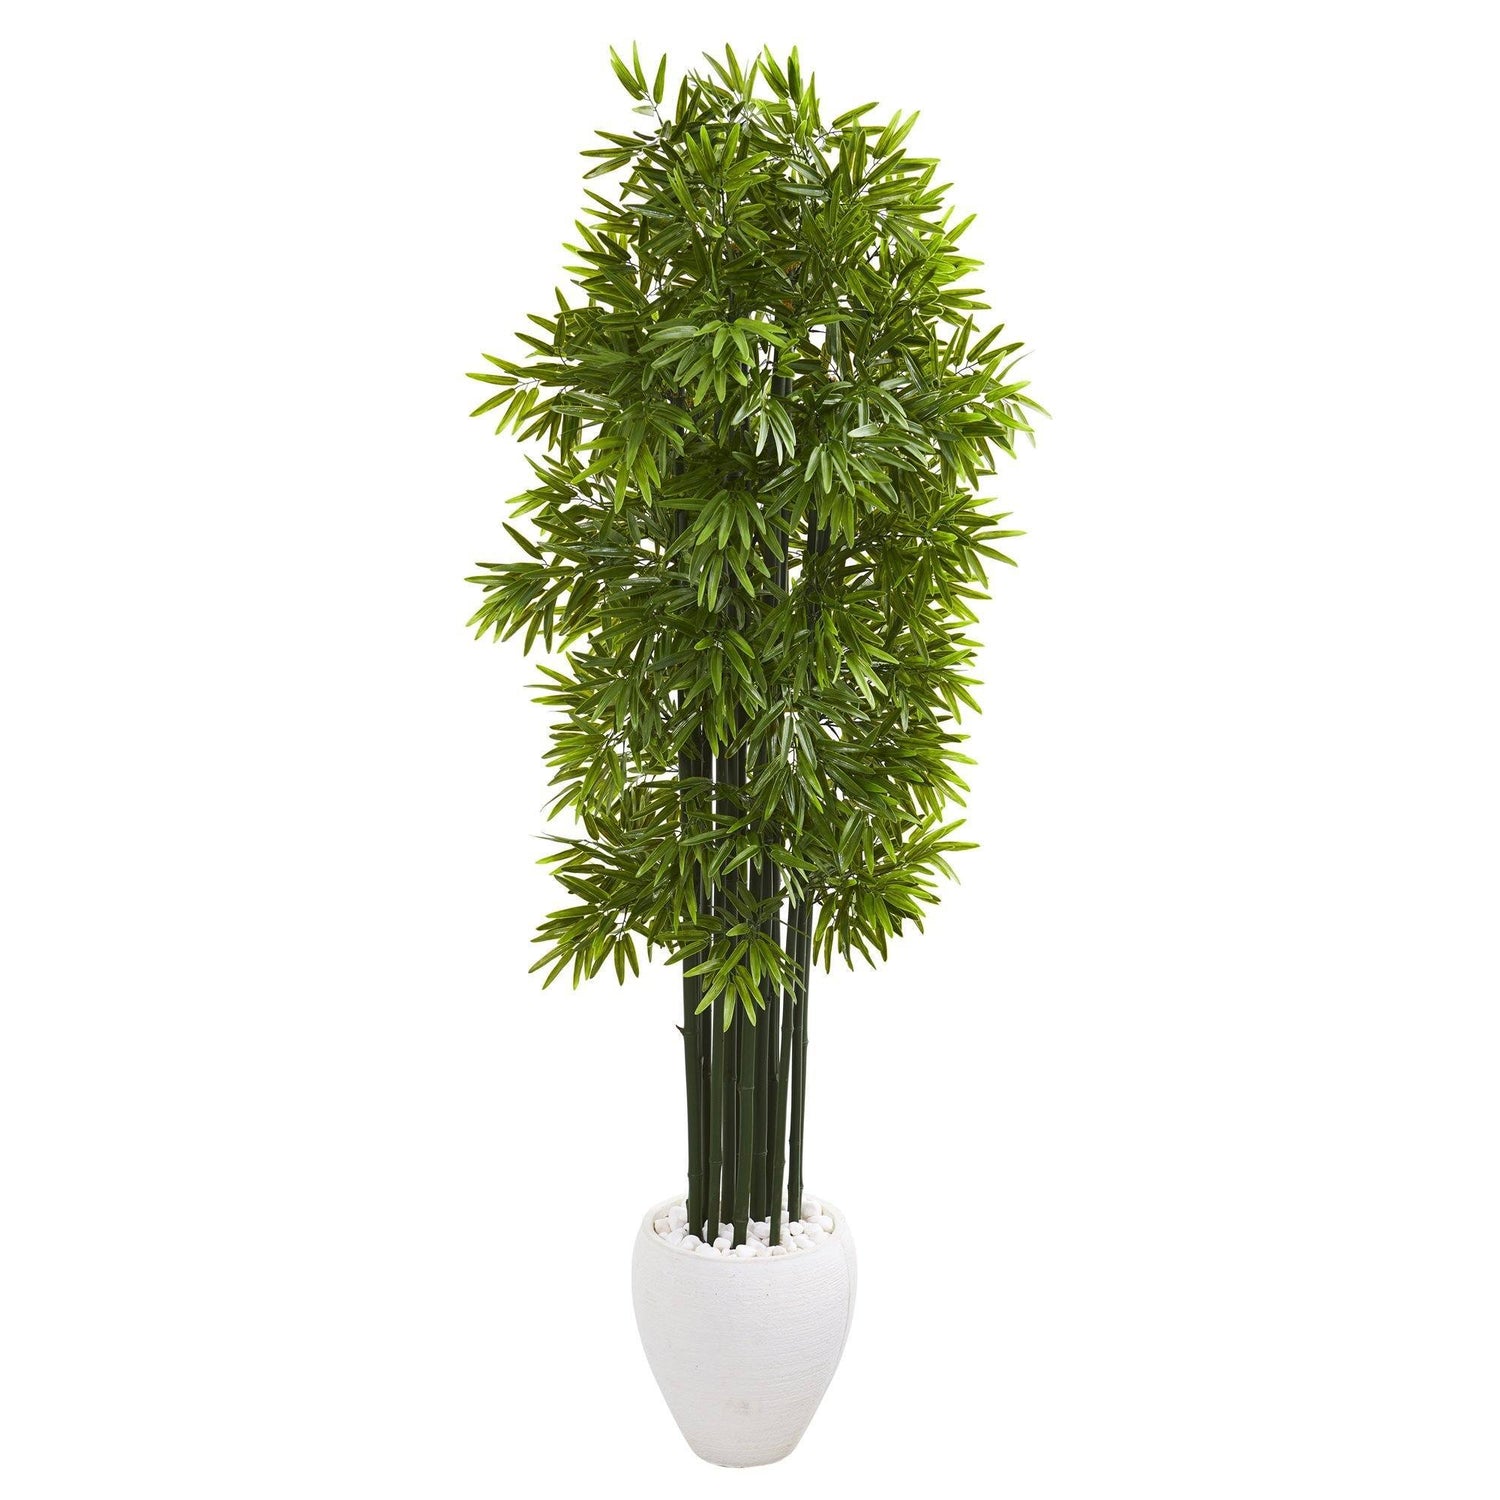 6’ Bamboo Artificial Tree with Green Trunks in White Planter (Indoor/Outdoor)